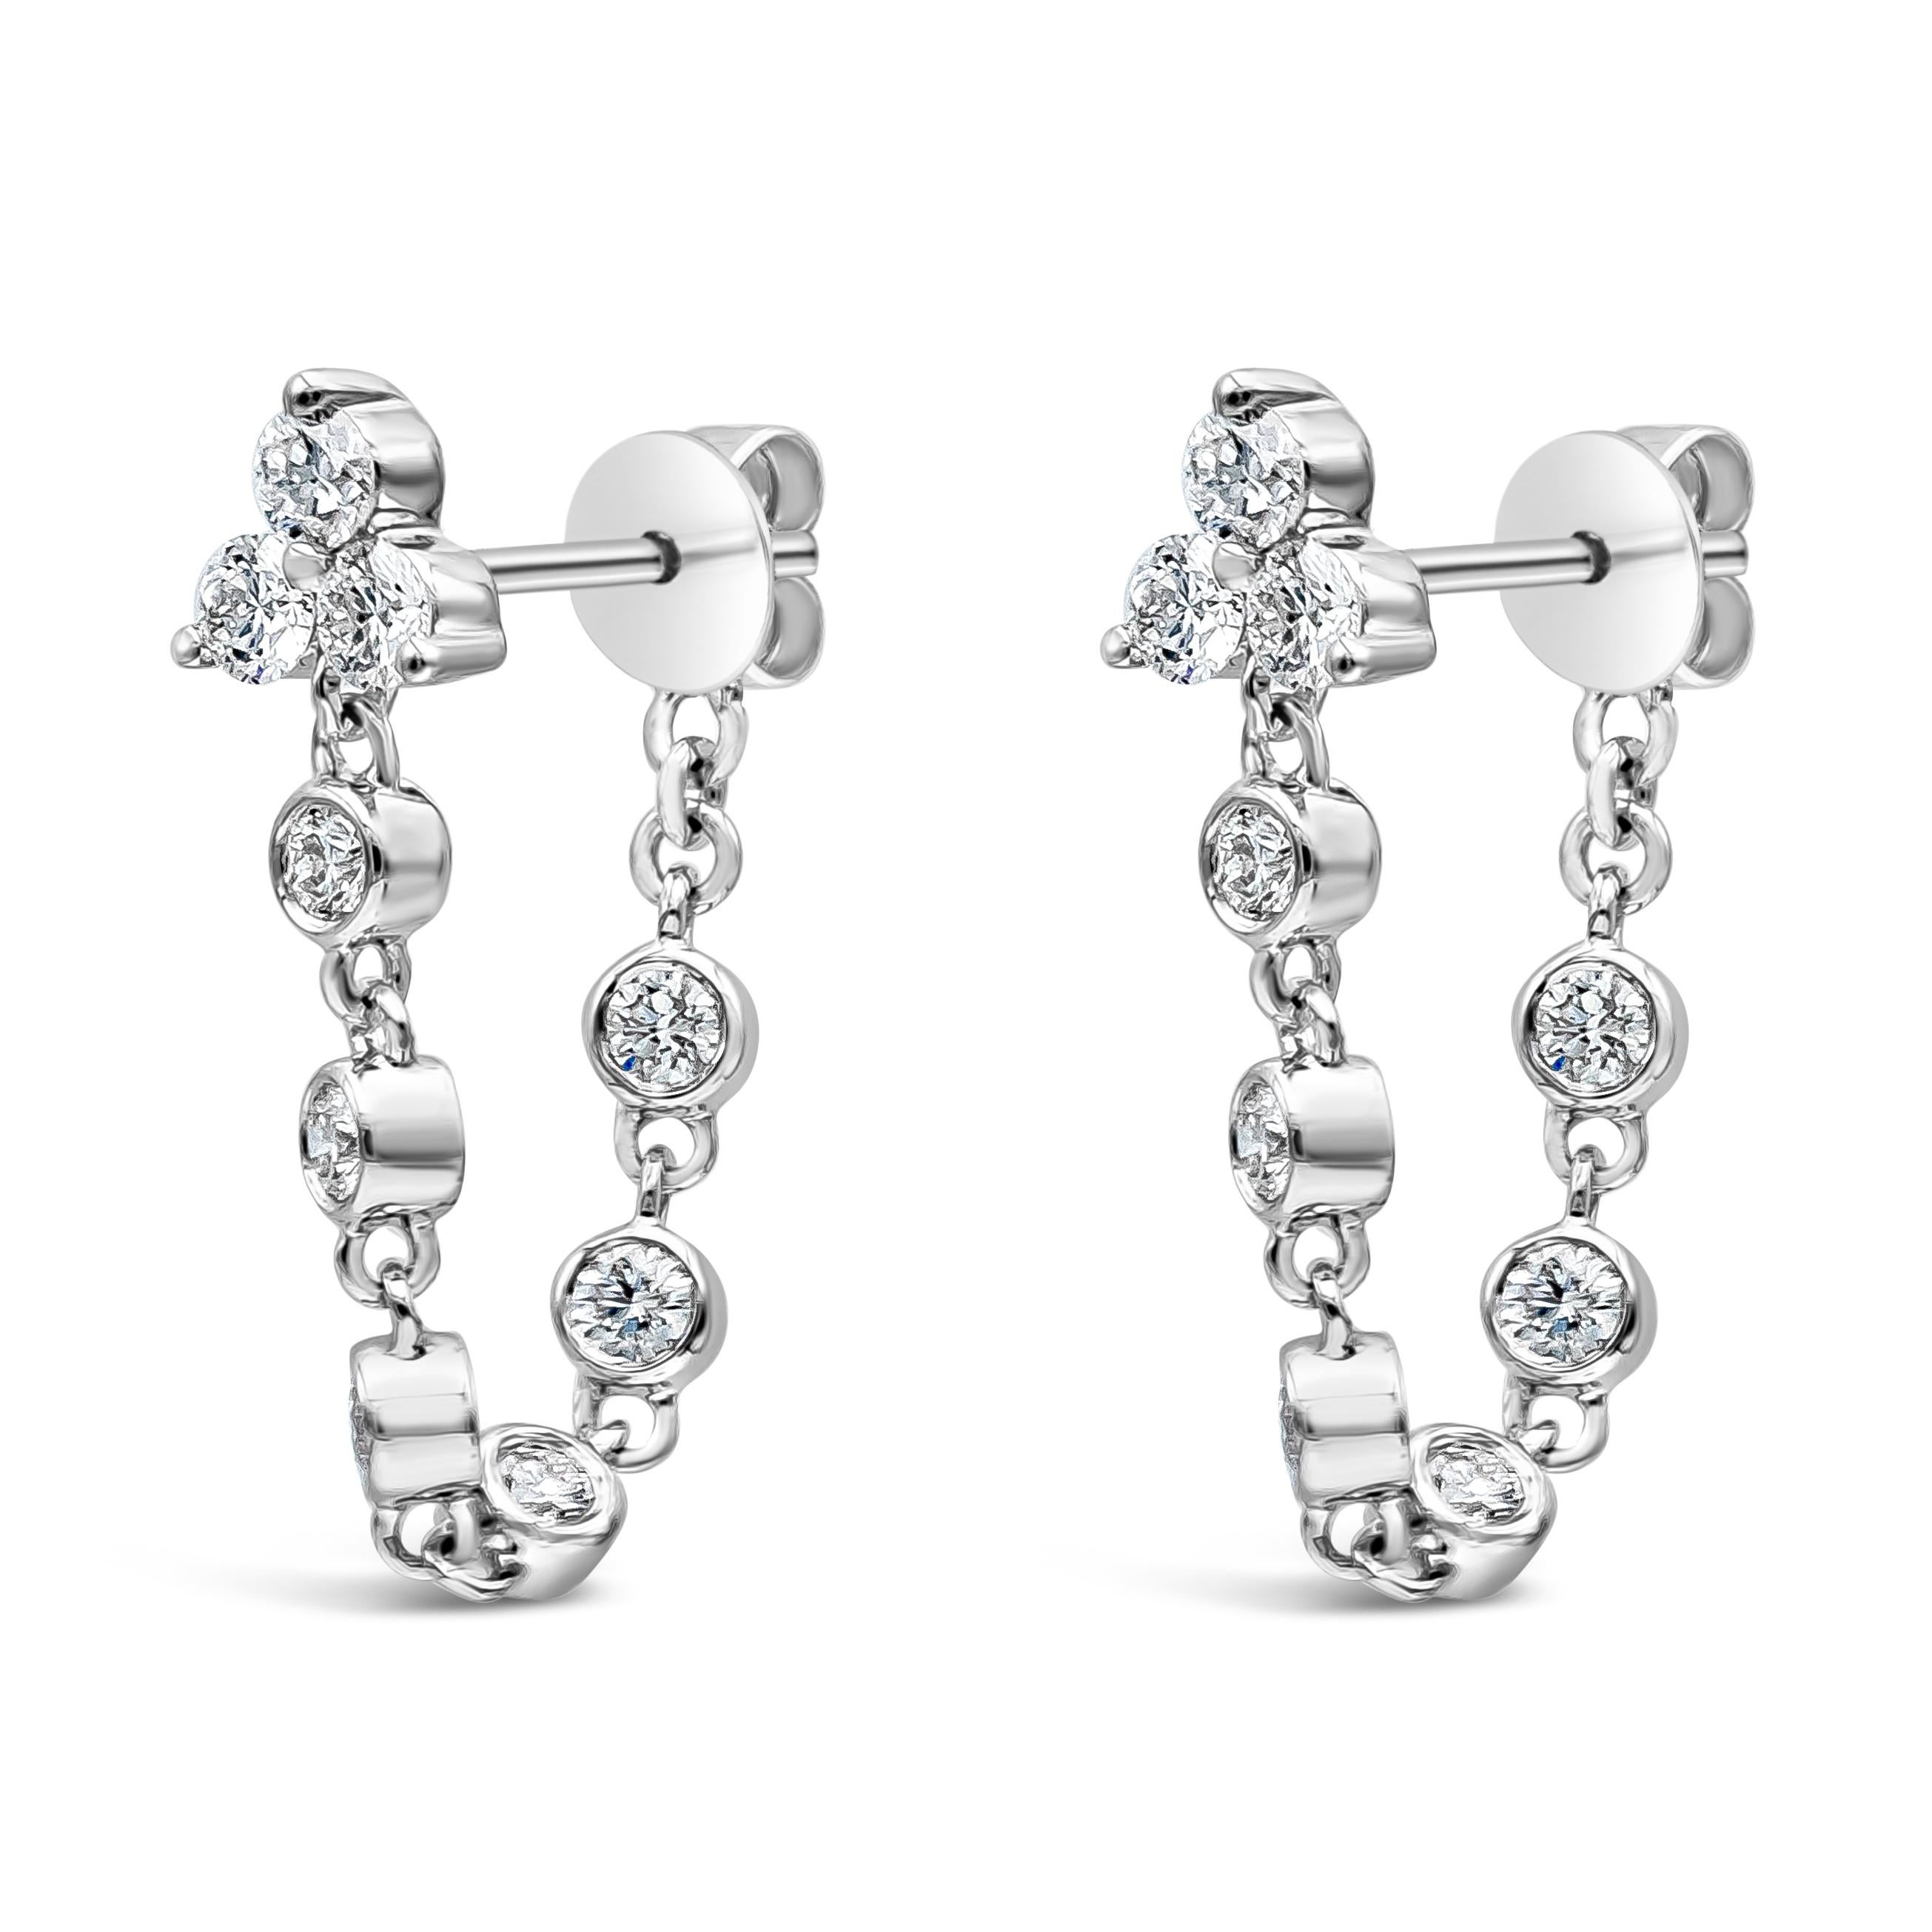 This unique and chic earring showcases a round brilliant diamonds set as a dangle hoop earring, Diamonds weigh 0.80 carats total, F Color and SI in Clarity. Made with 18K White Gold

Style available in different price ranges. Prices are based on